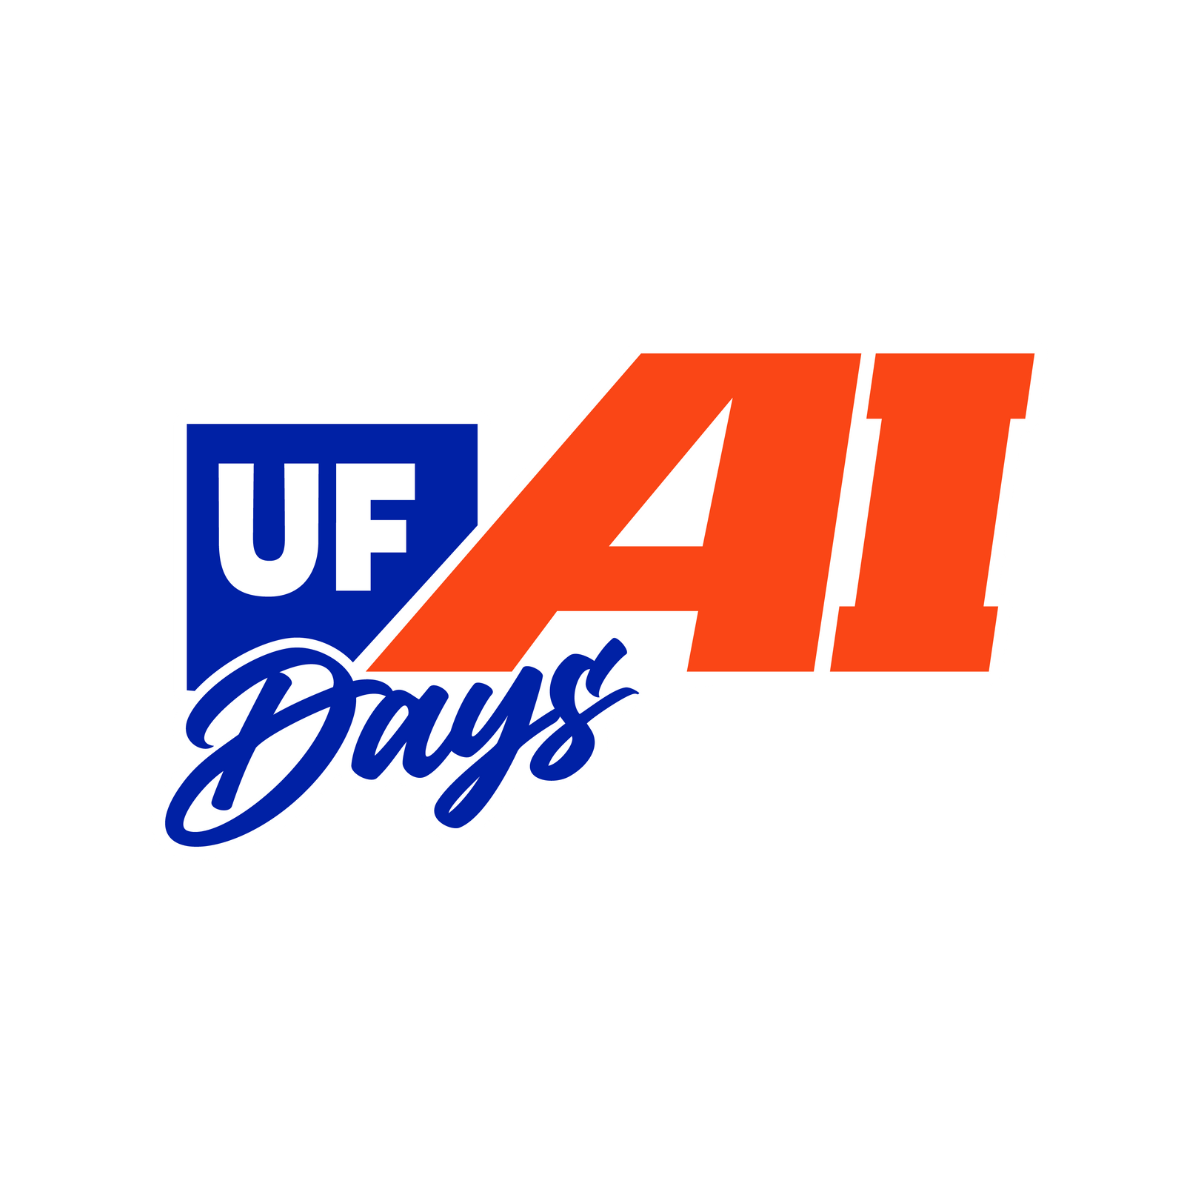 How to participate in UF’s AI Days, Oct. 16-20